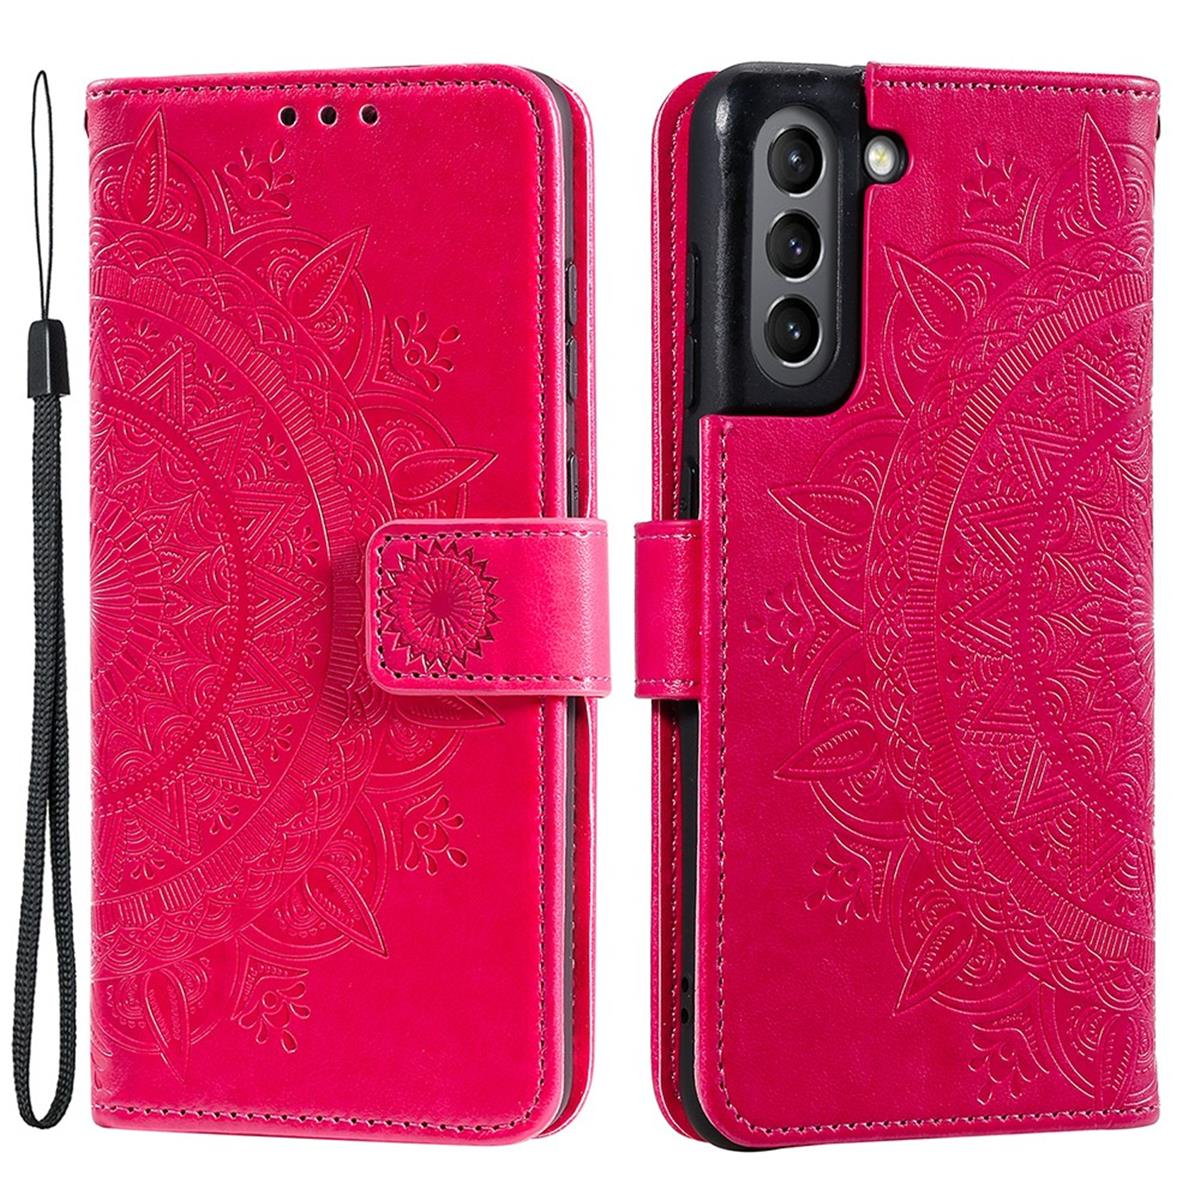 COVERKINGZ Klapphülle mit Samsung, Muster, Mandala Bookcover, Galaxy Pink S21 FE